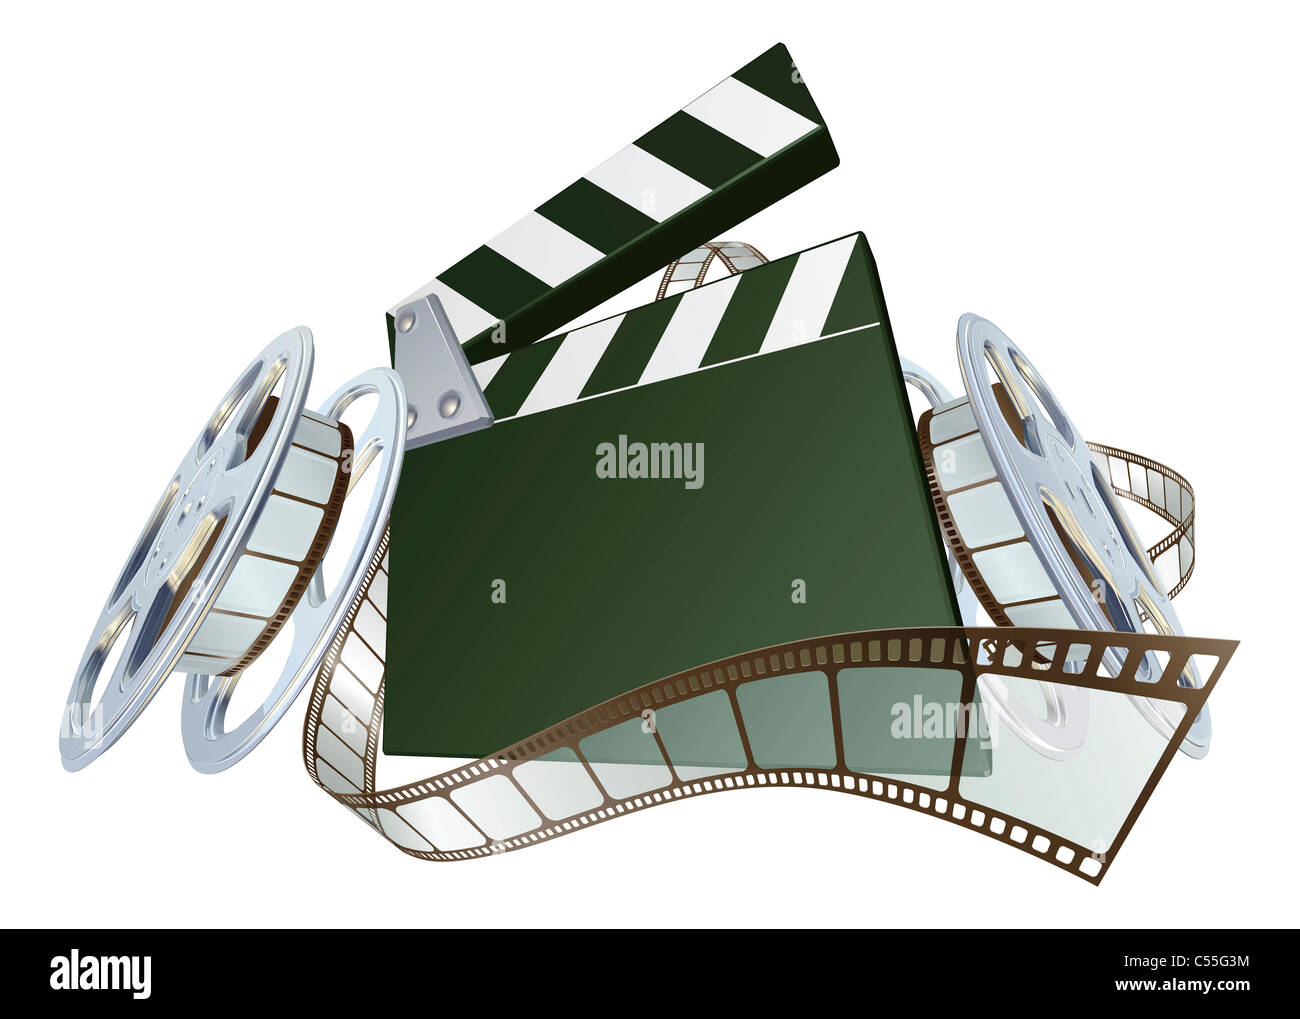 A clapperboard and film spooling out of film reel illustration. Dynamic perspective and copyspace on the board for your text. Stock Photo